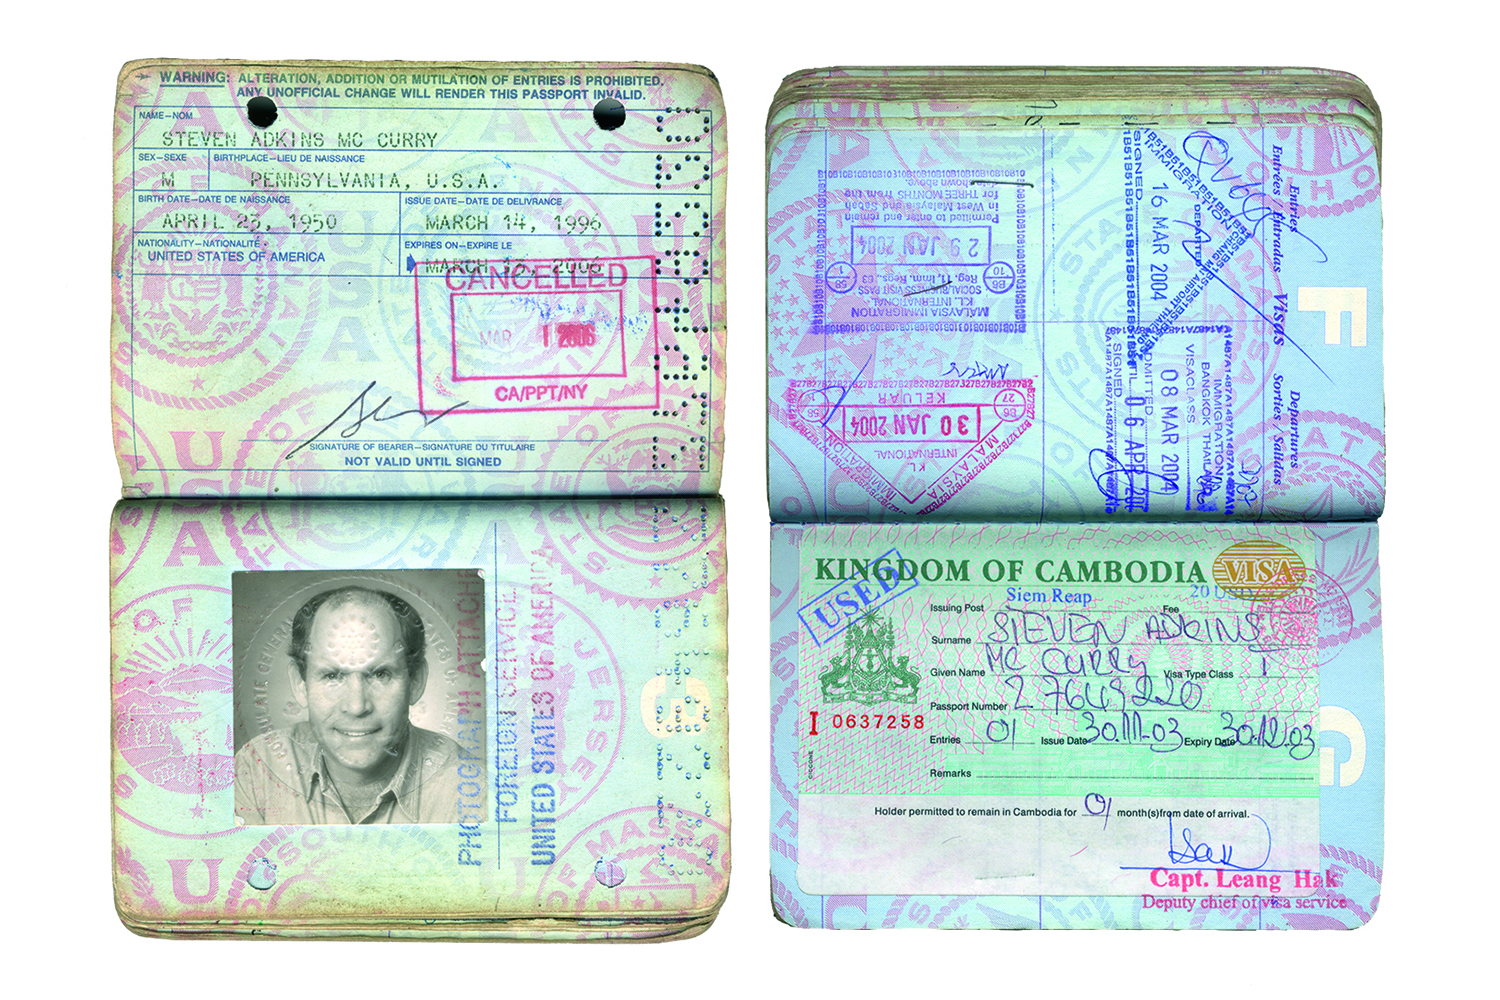 Photo page from McCurry’s Passport, 1996–2006 (l)
                              
                              
                              Cambodian Visa, 2003, from McCurry’s Passport (r)